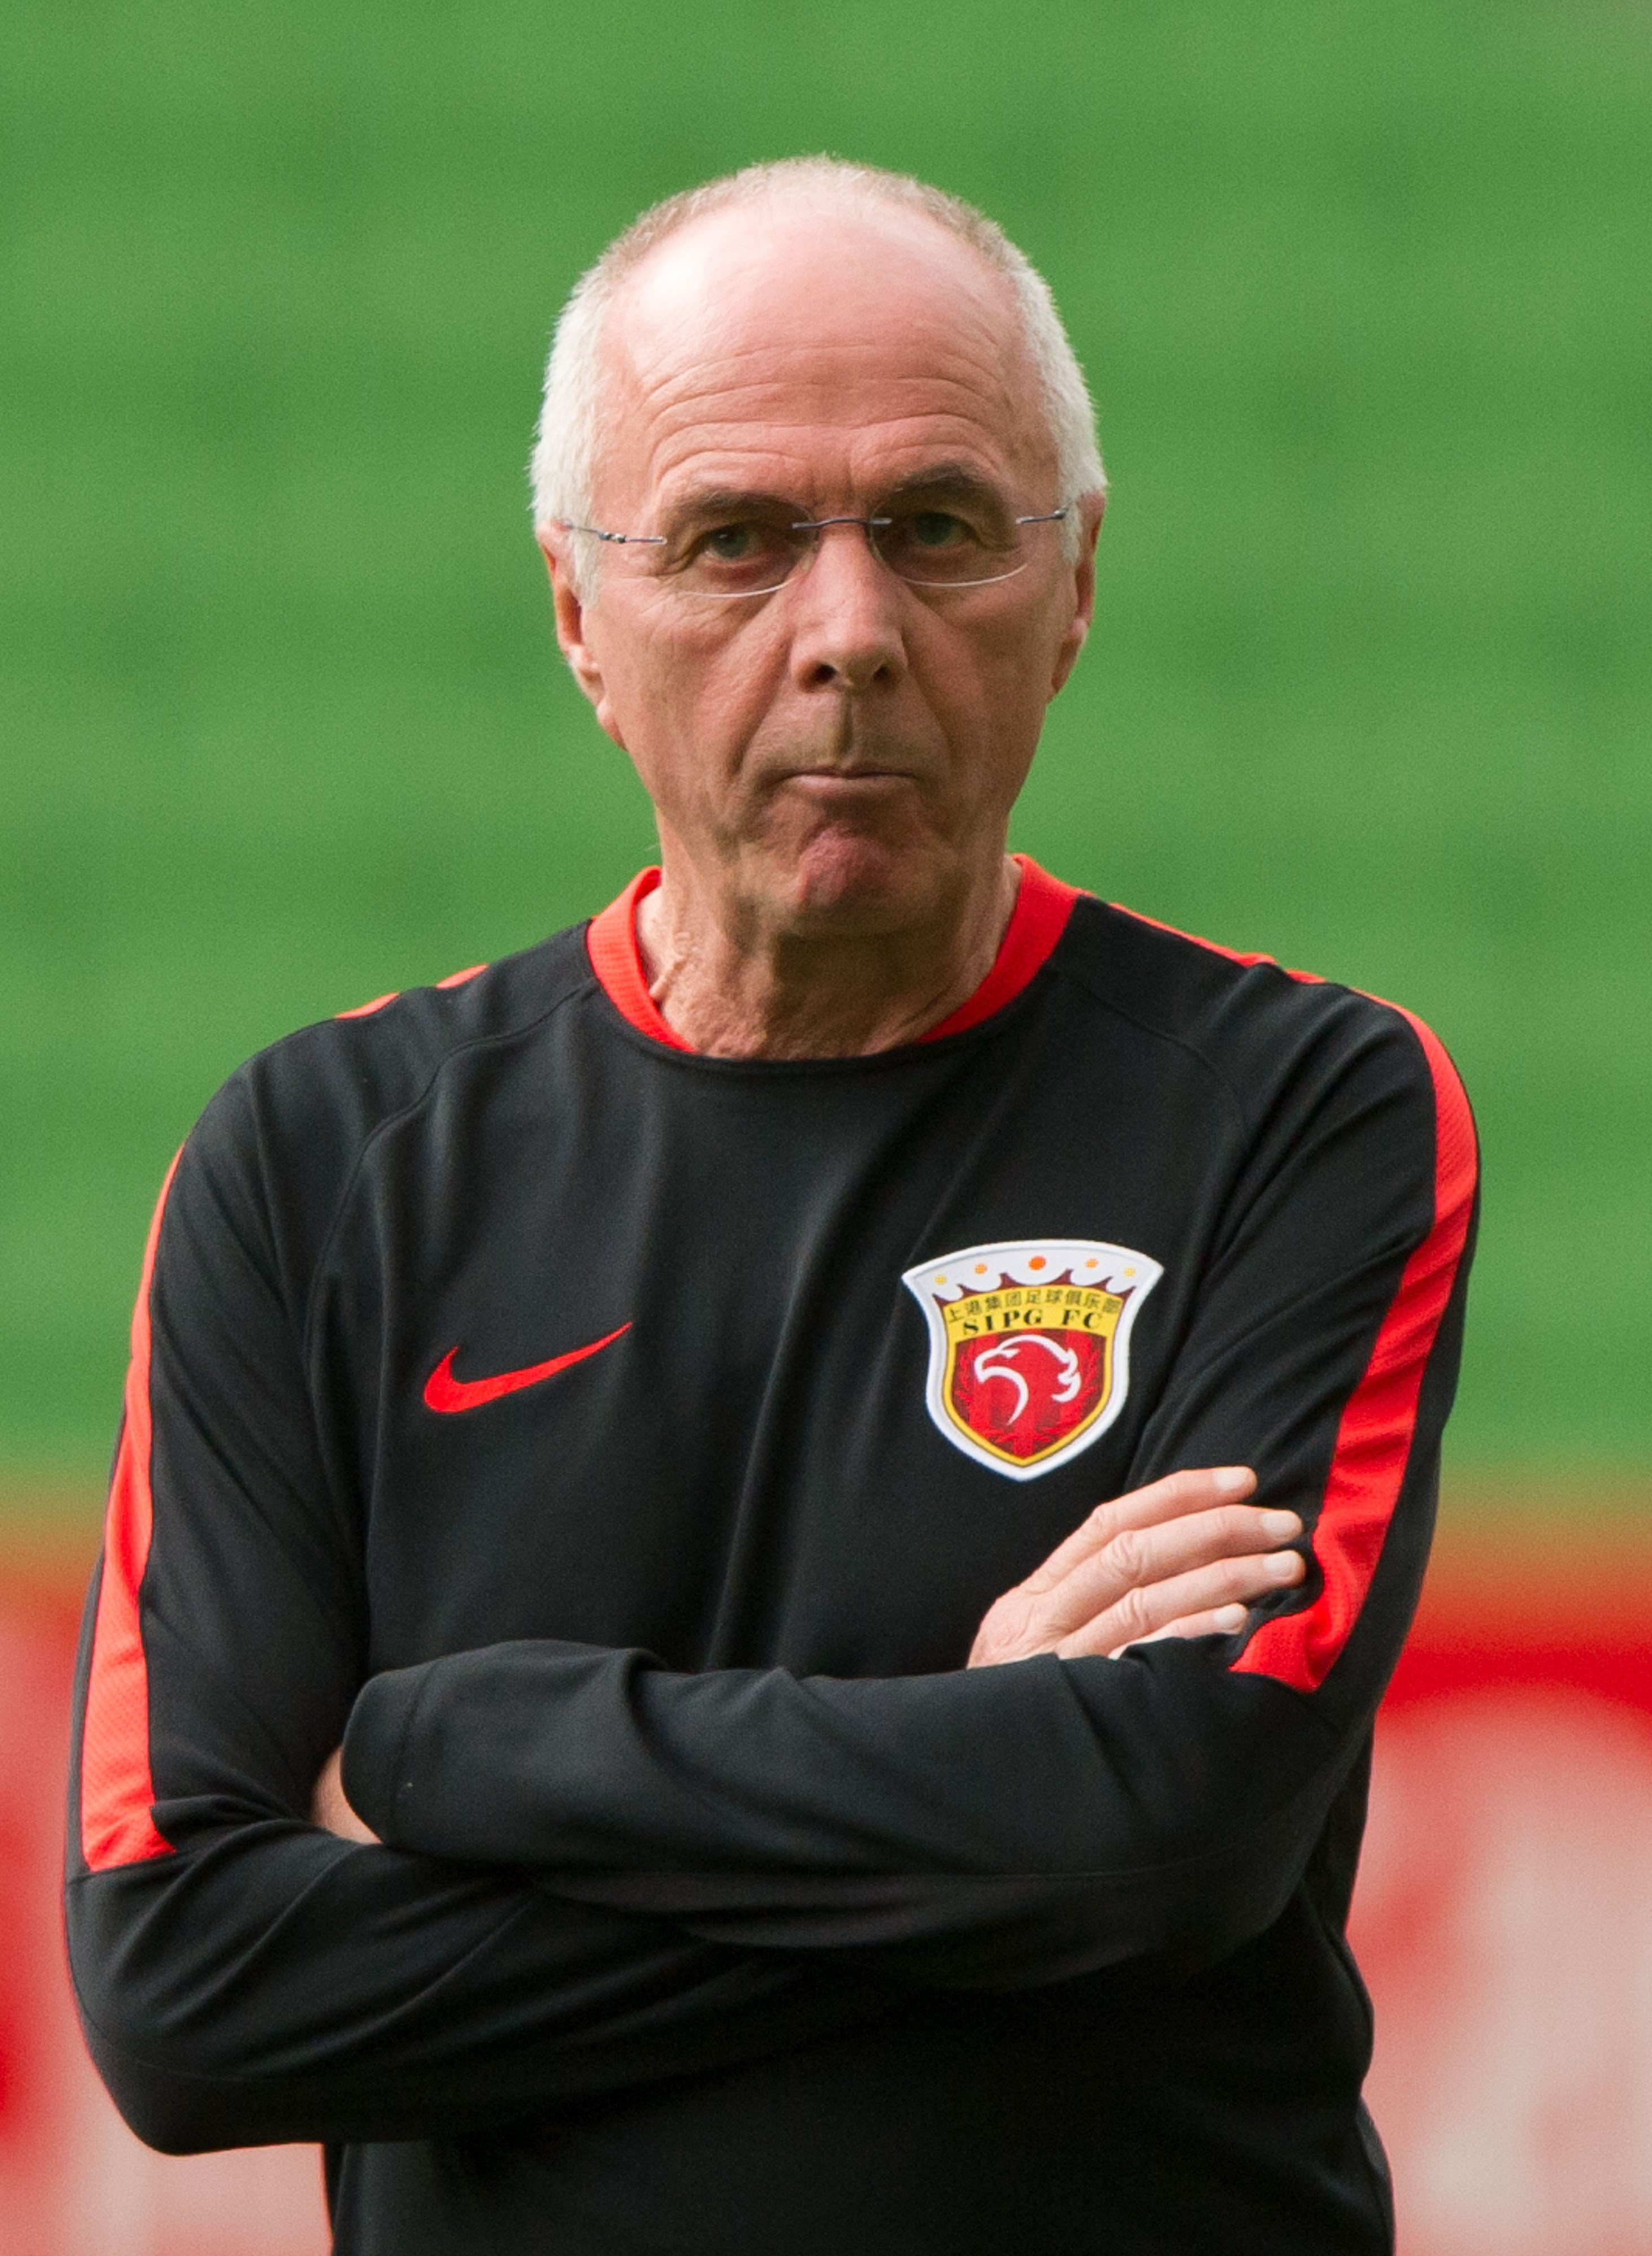 Sven-Goran Eriksson takes a training session ahead of Shanghai SIPG’s AFC Champions League match against Melbourne Victory in 2016. Photo: Xinhua